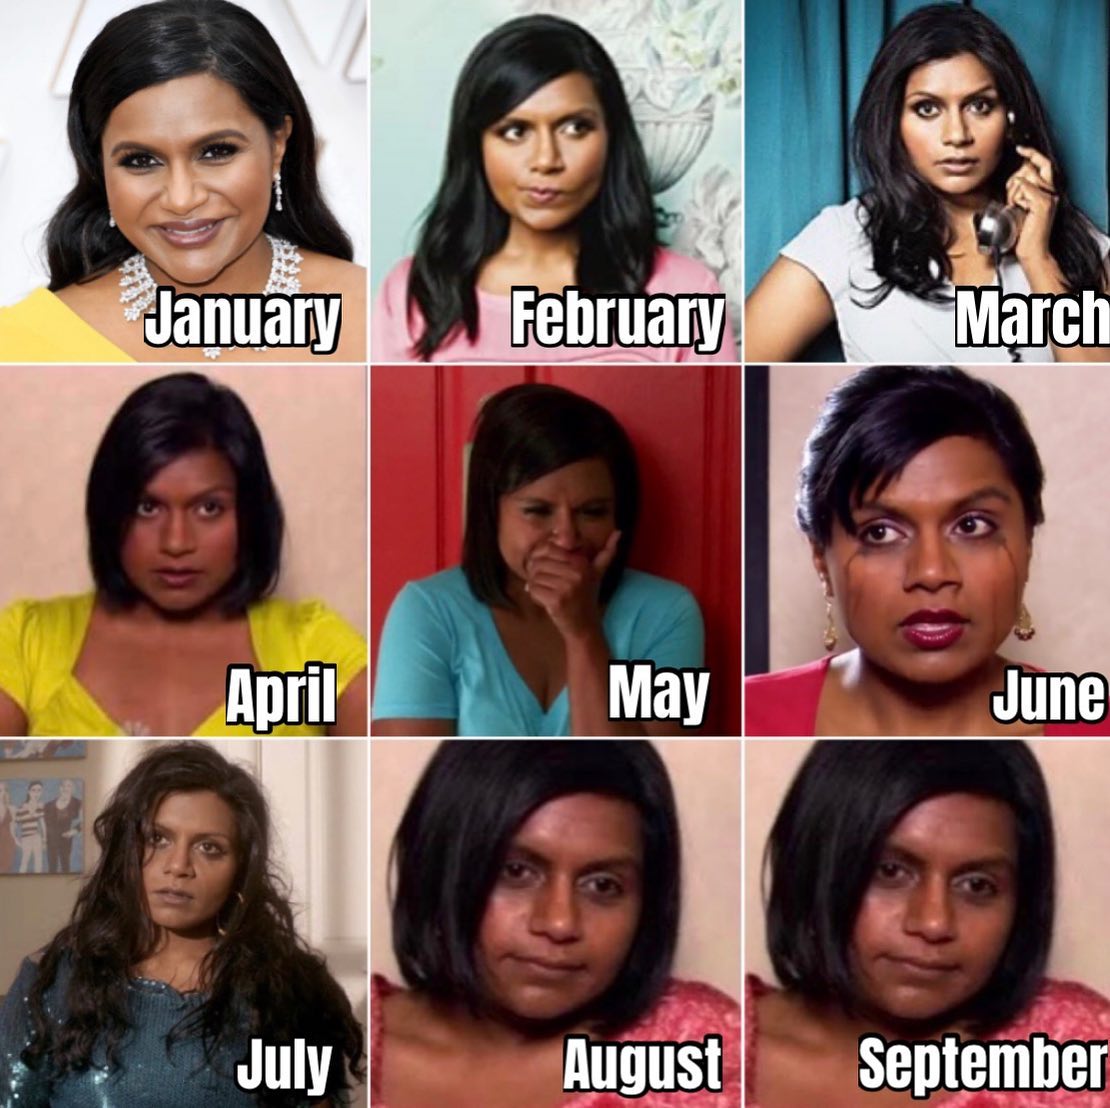 2020 challenge - reese witherspoon -black hair - January February March April May June July August September